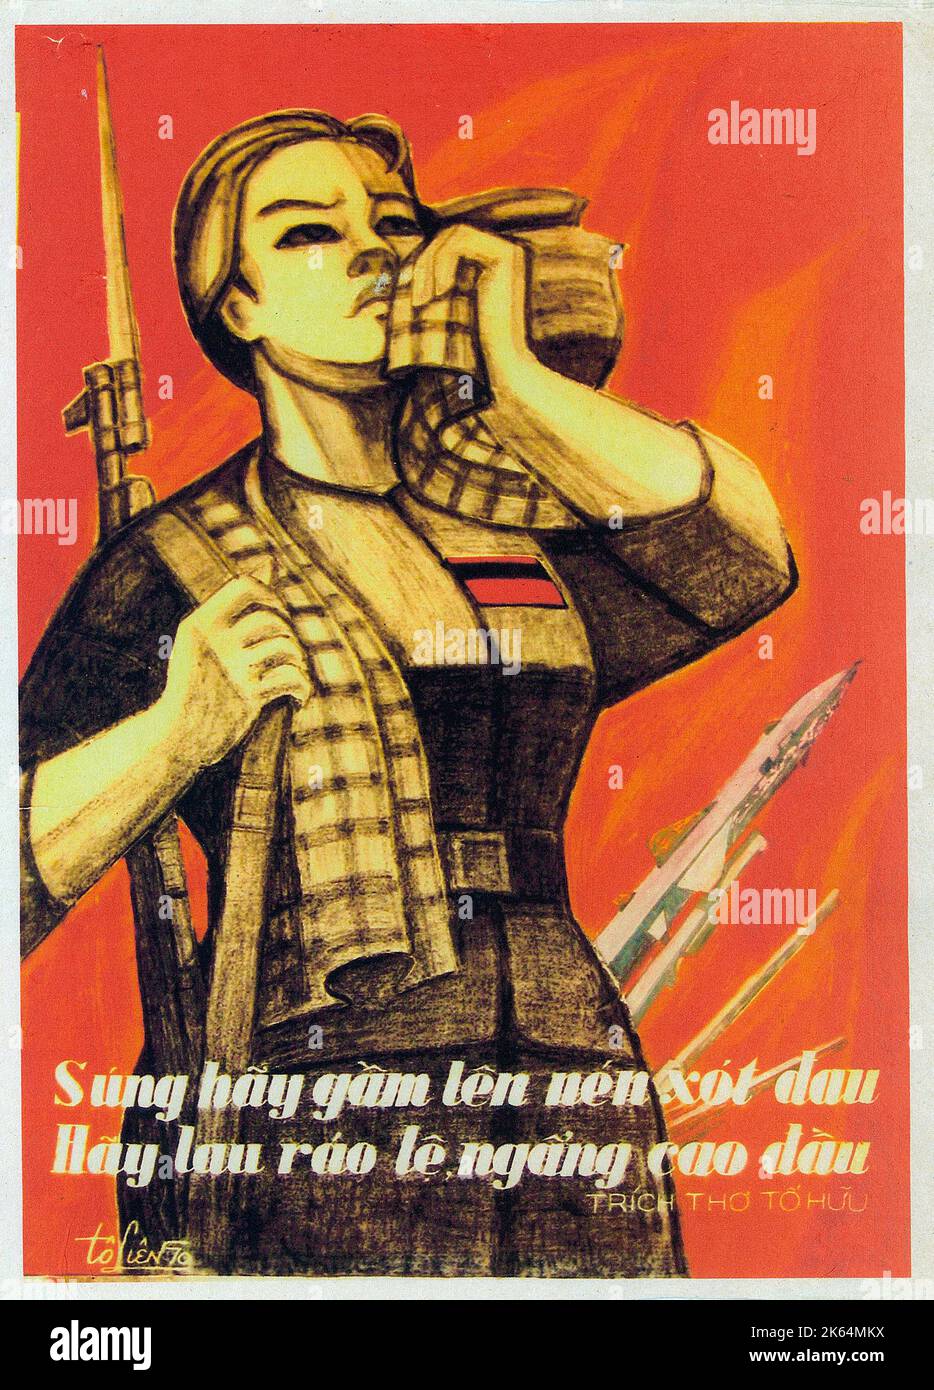 Vietnamese Patriotic Poster - 'Channel the pain in your soul and hold your head high' Stock Photo